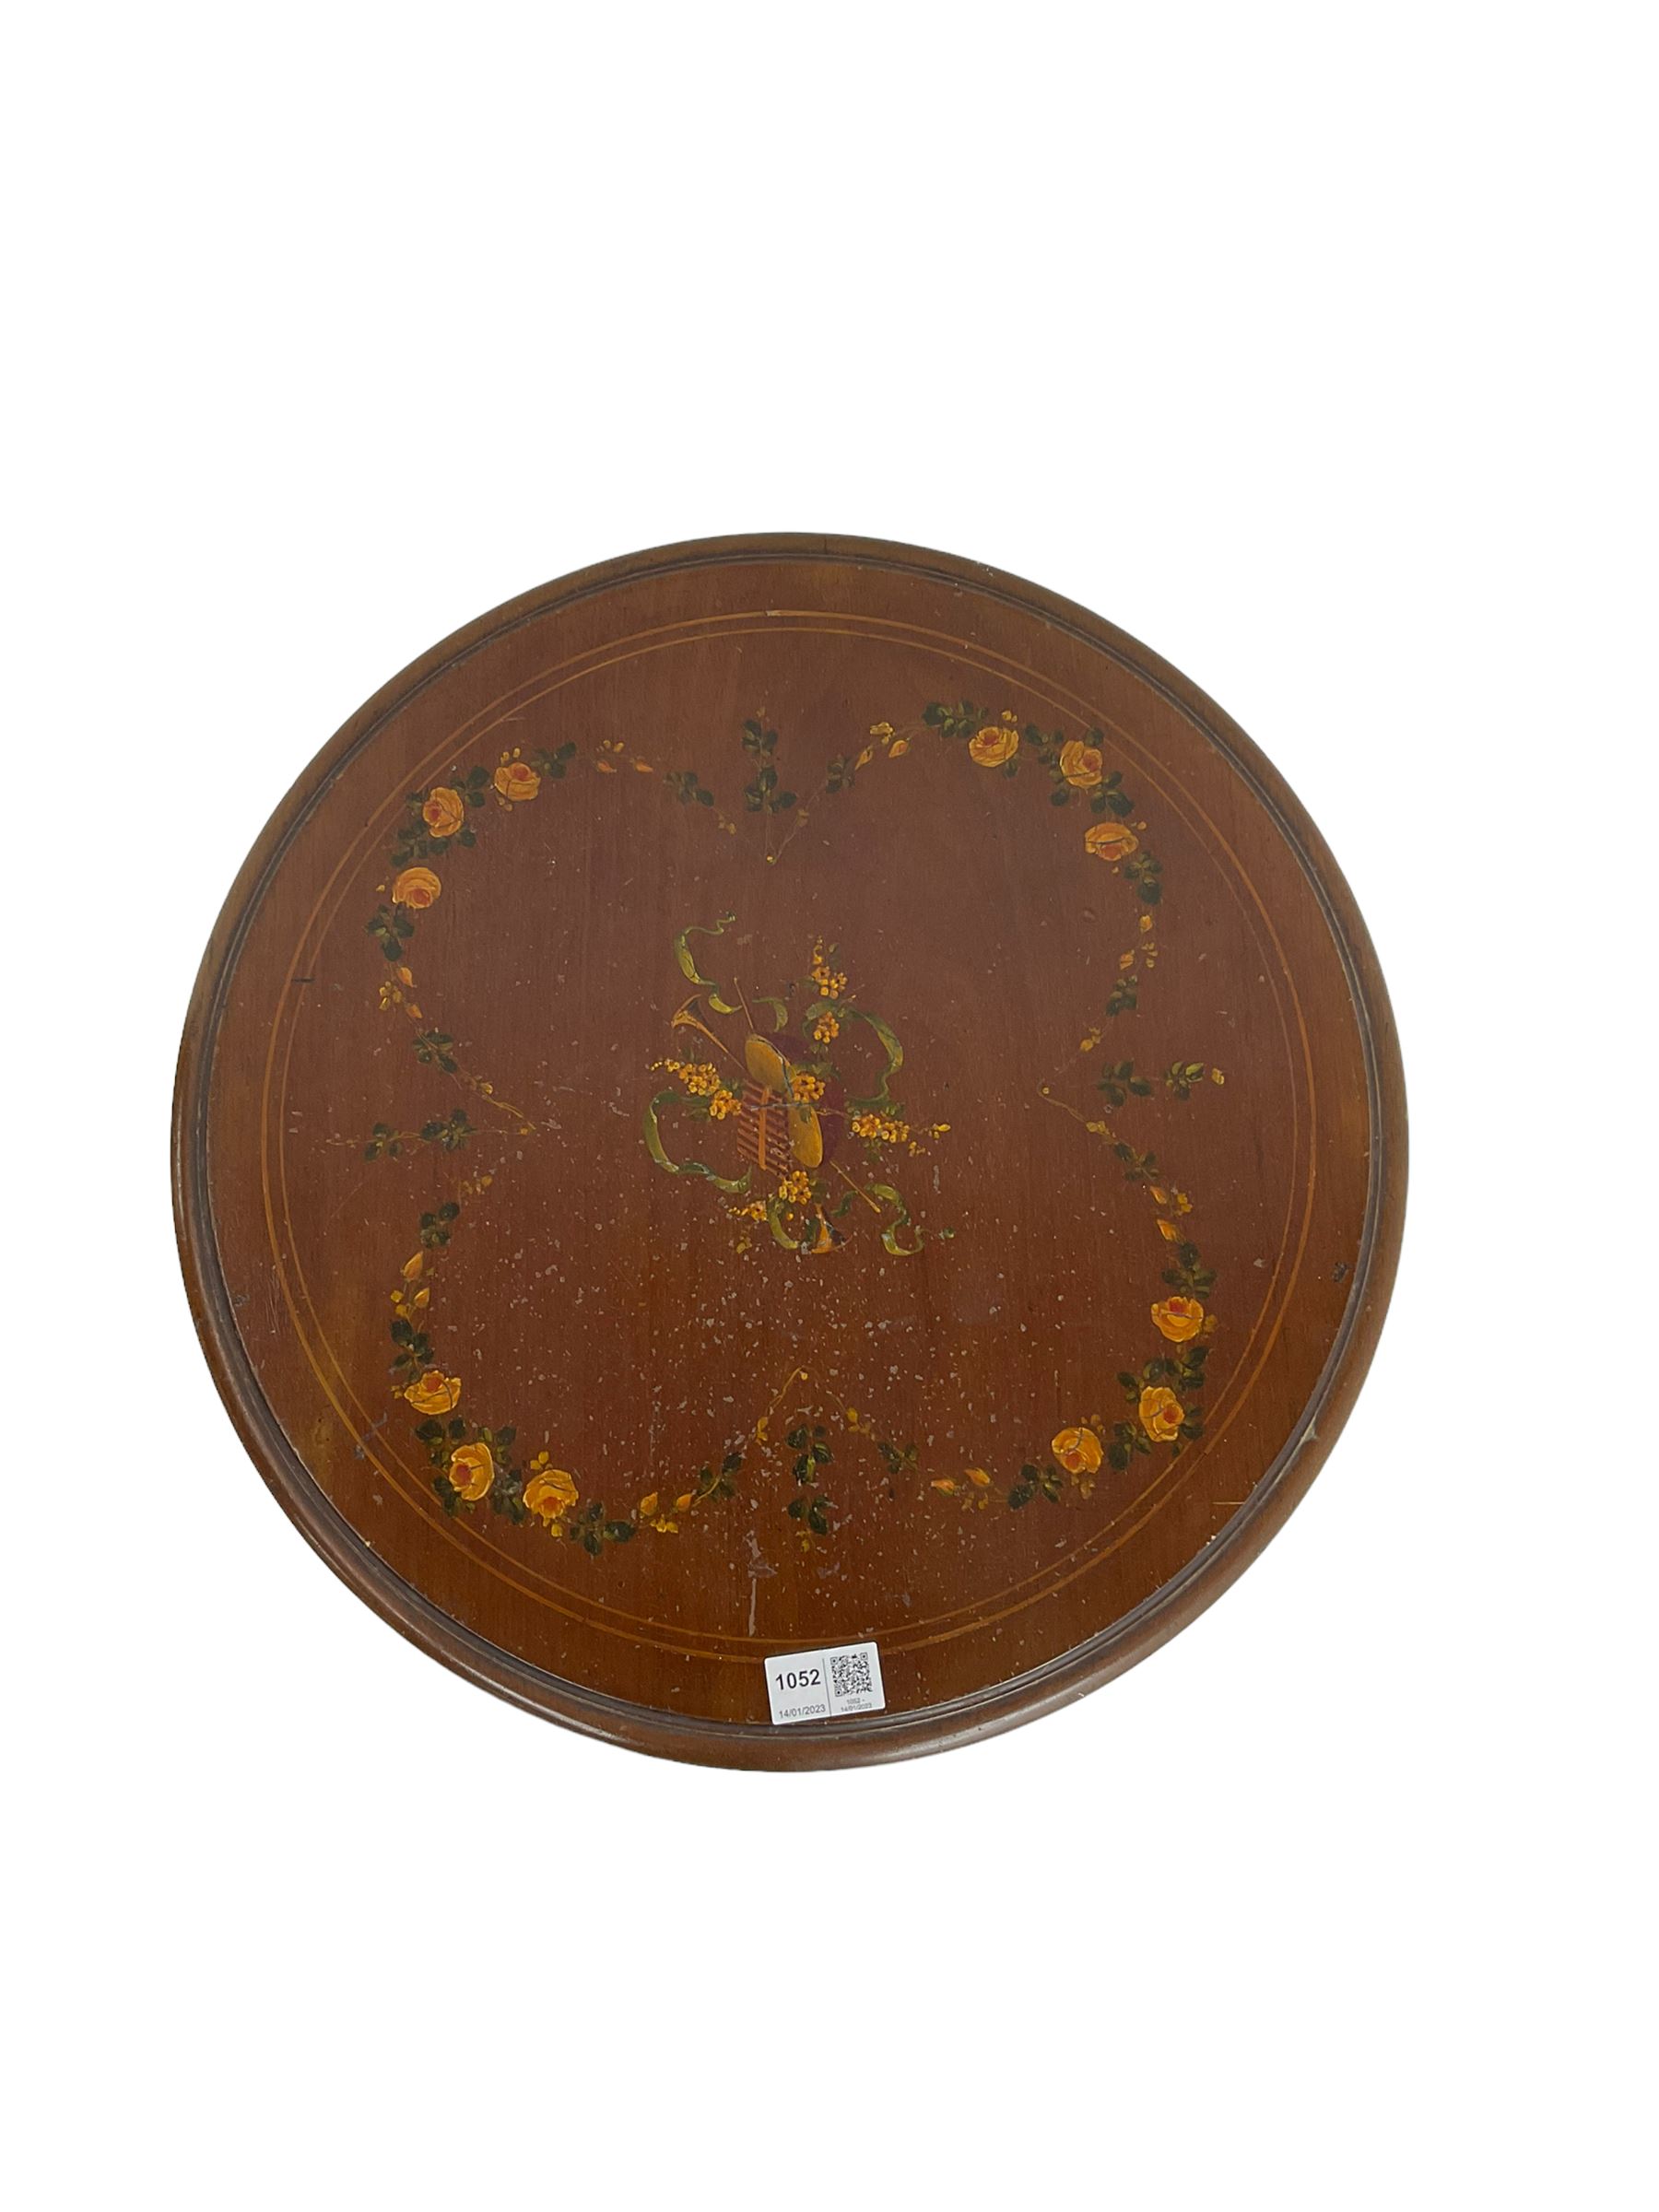 Greenwood and Sons York - early 20th century mahogany side or lamp table - Image 3 of 6